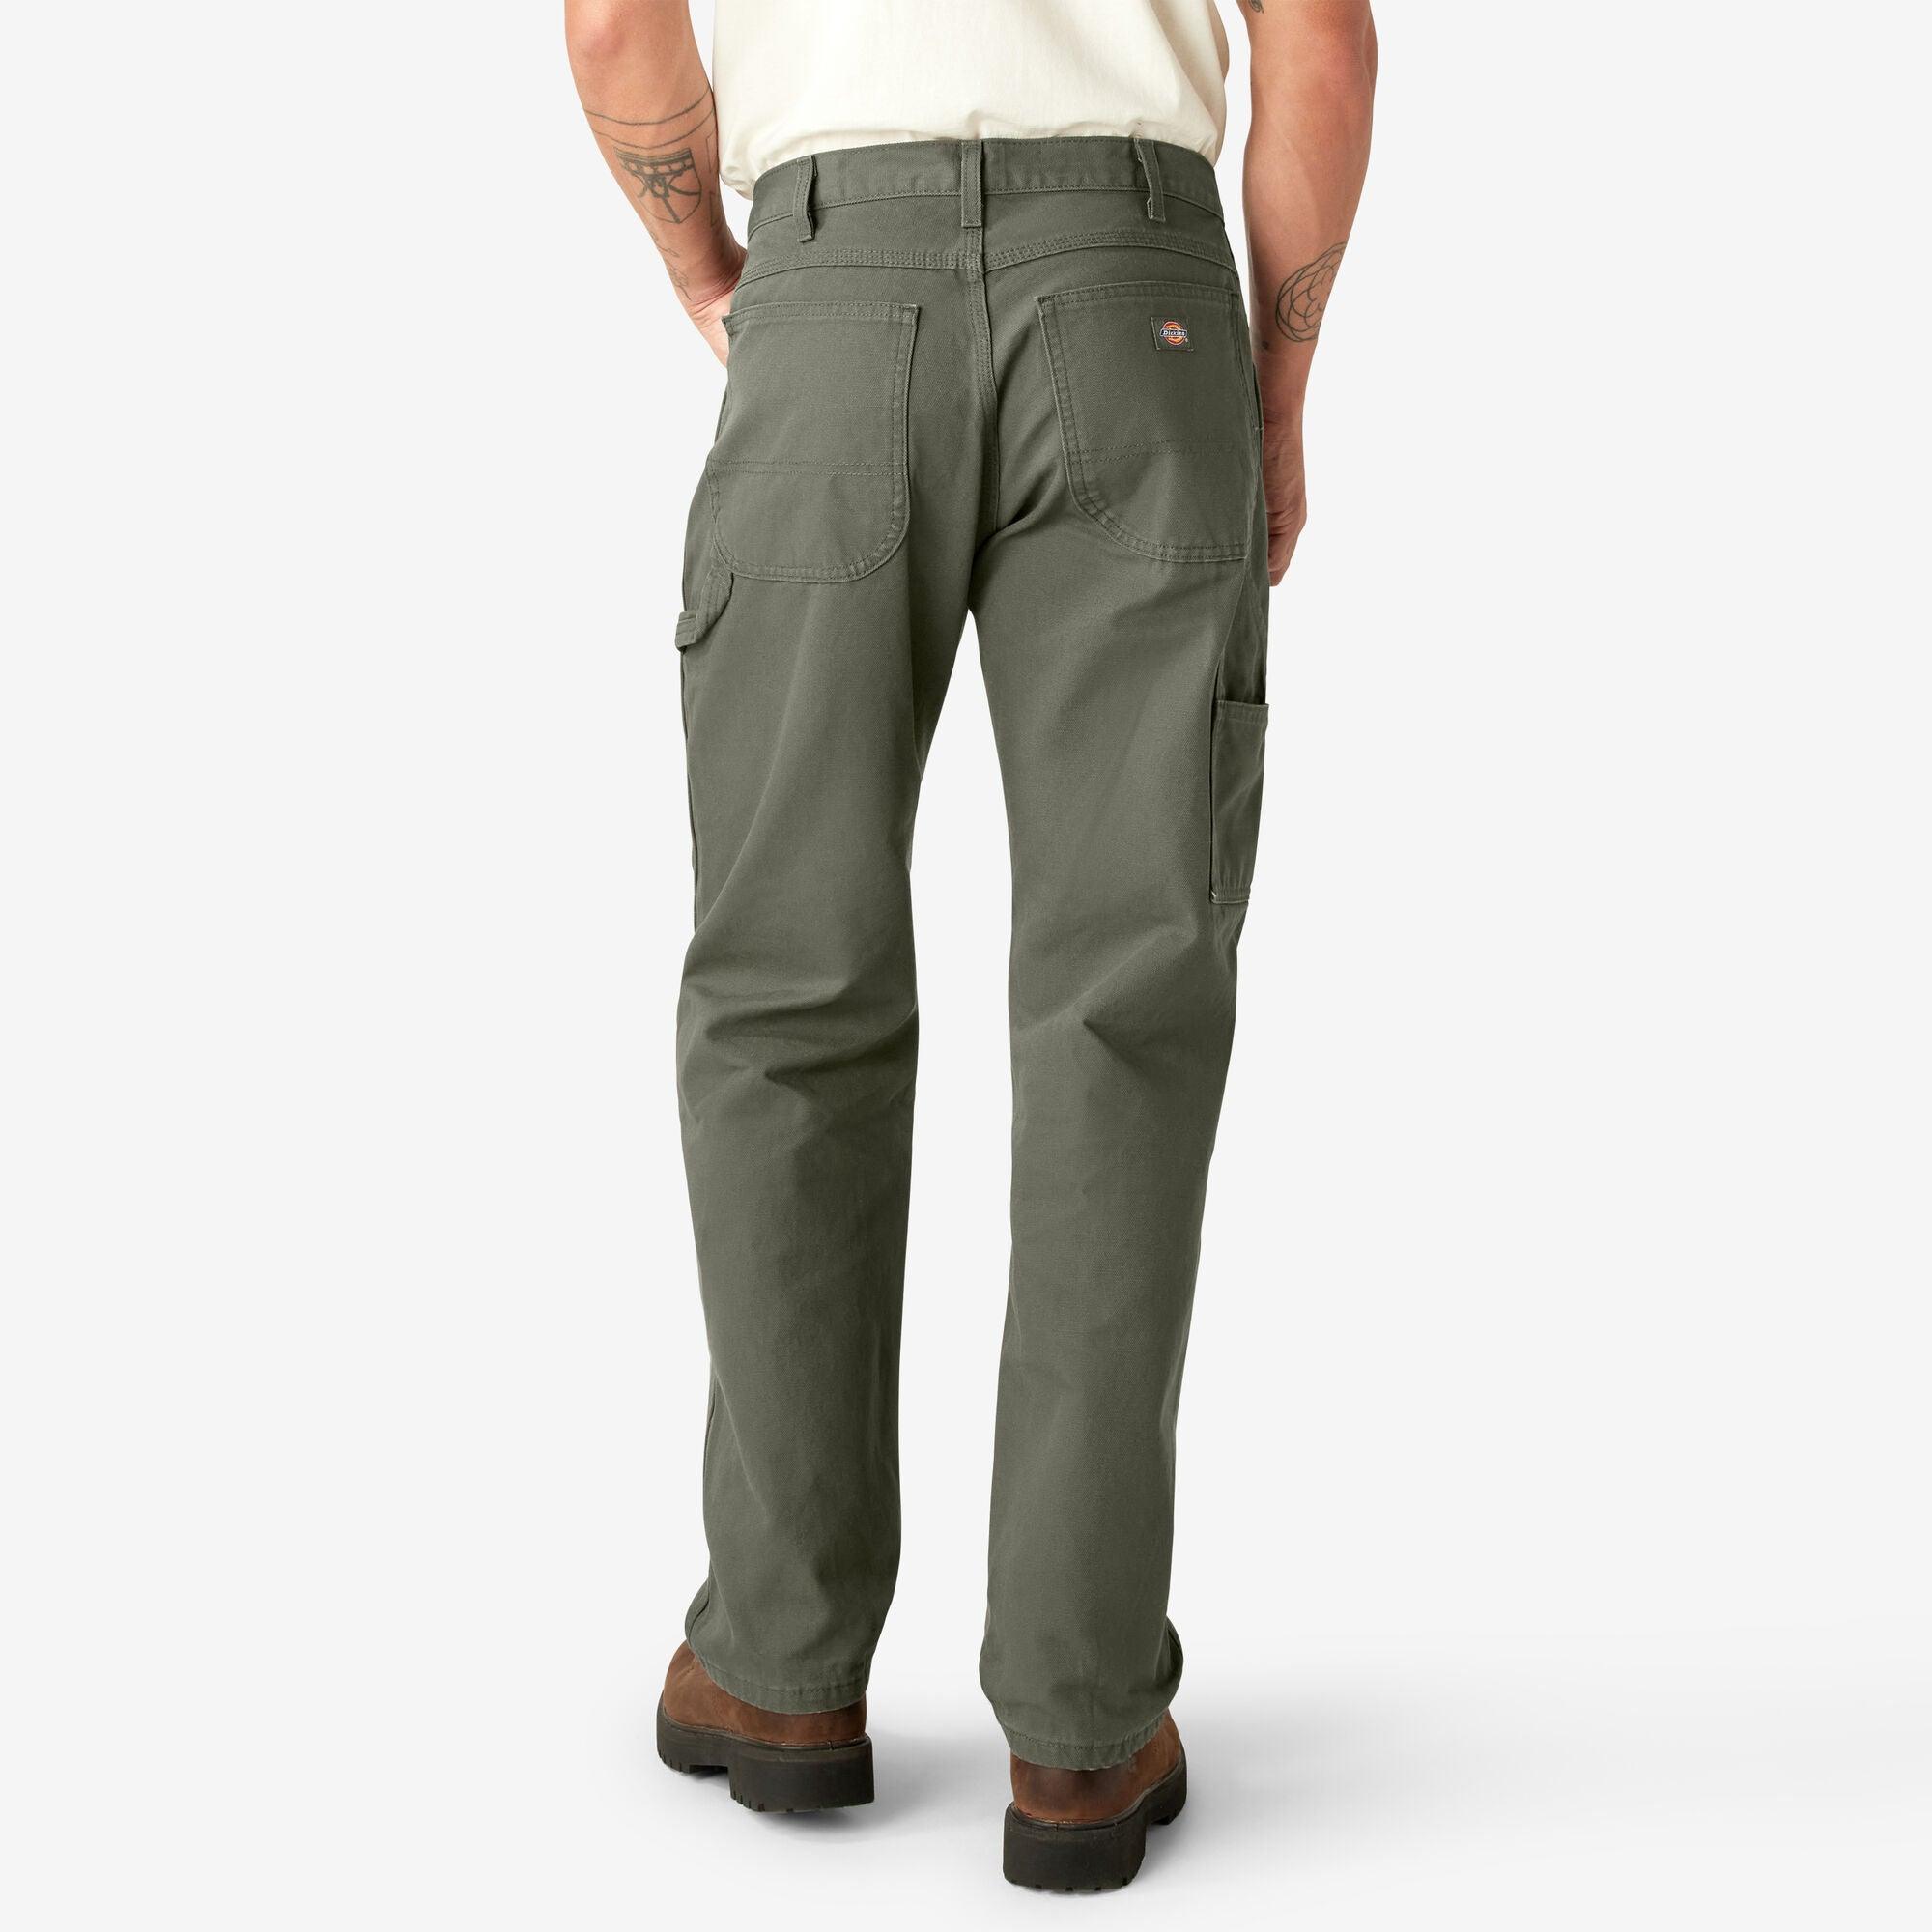 Dickies Relaxed Fit Carpenter Jeans, Tinted Heritage Khaki, 46W x 30L at  Amazon Men's Clothing store